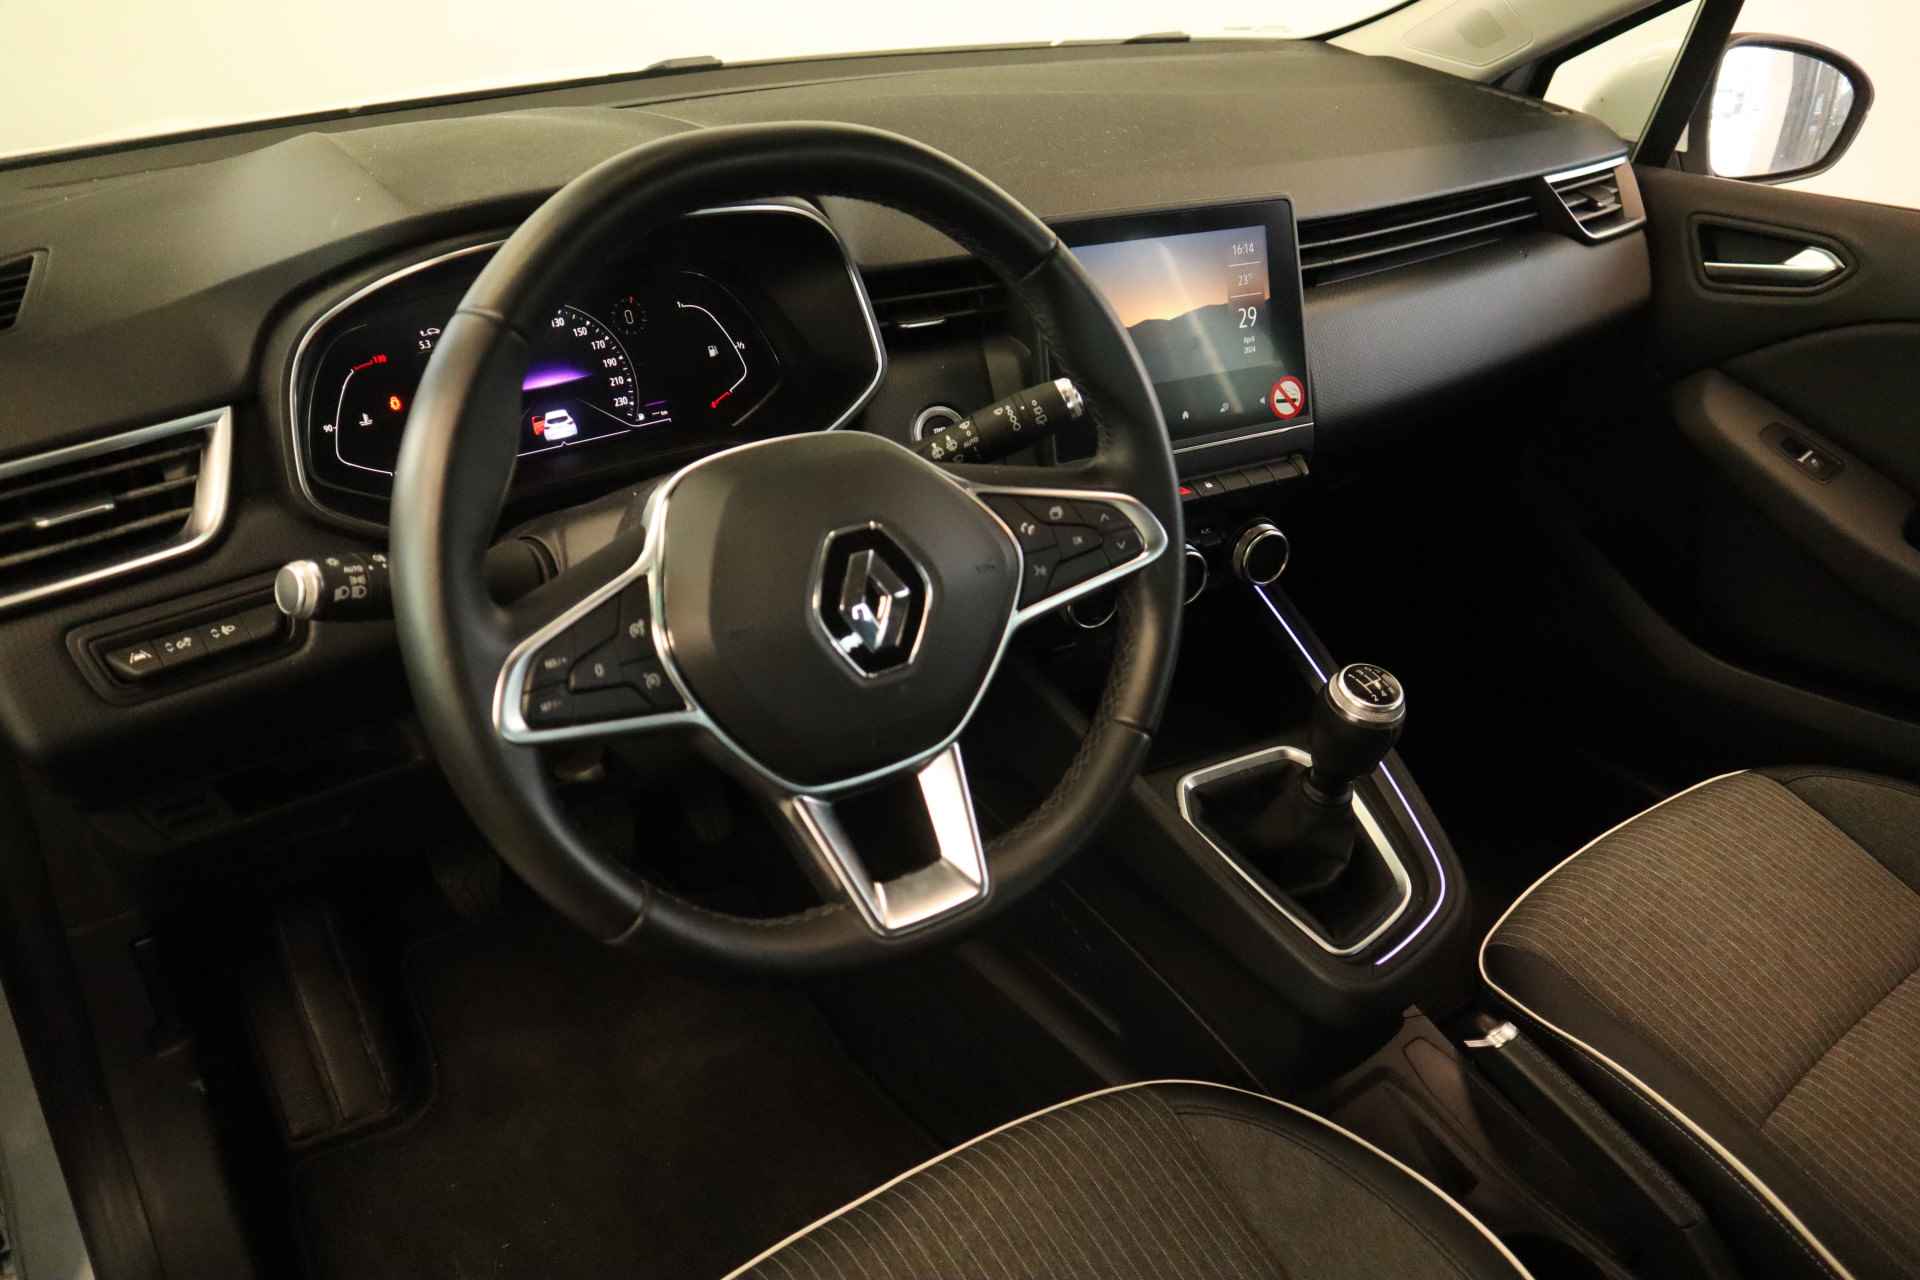 Renault Clio 1.0 TCe Intens Navigatie Full-led CruiseControl - 10/25